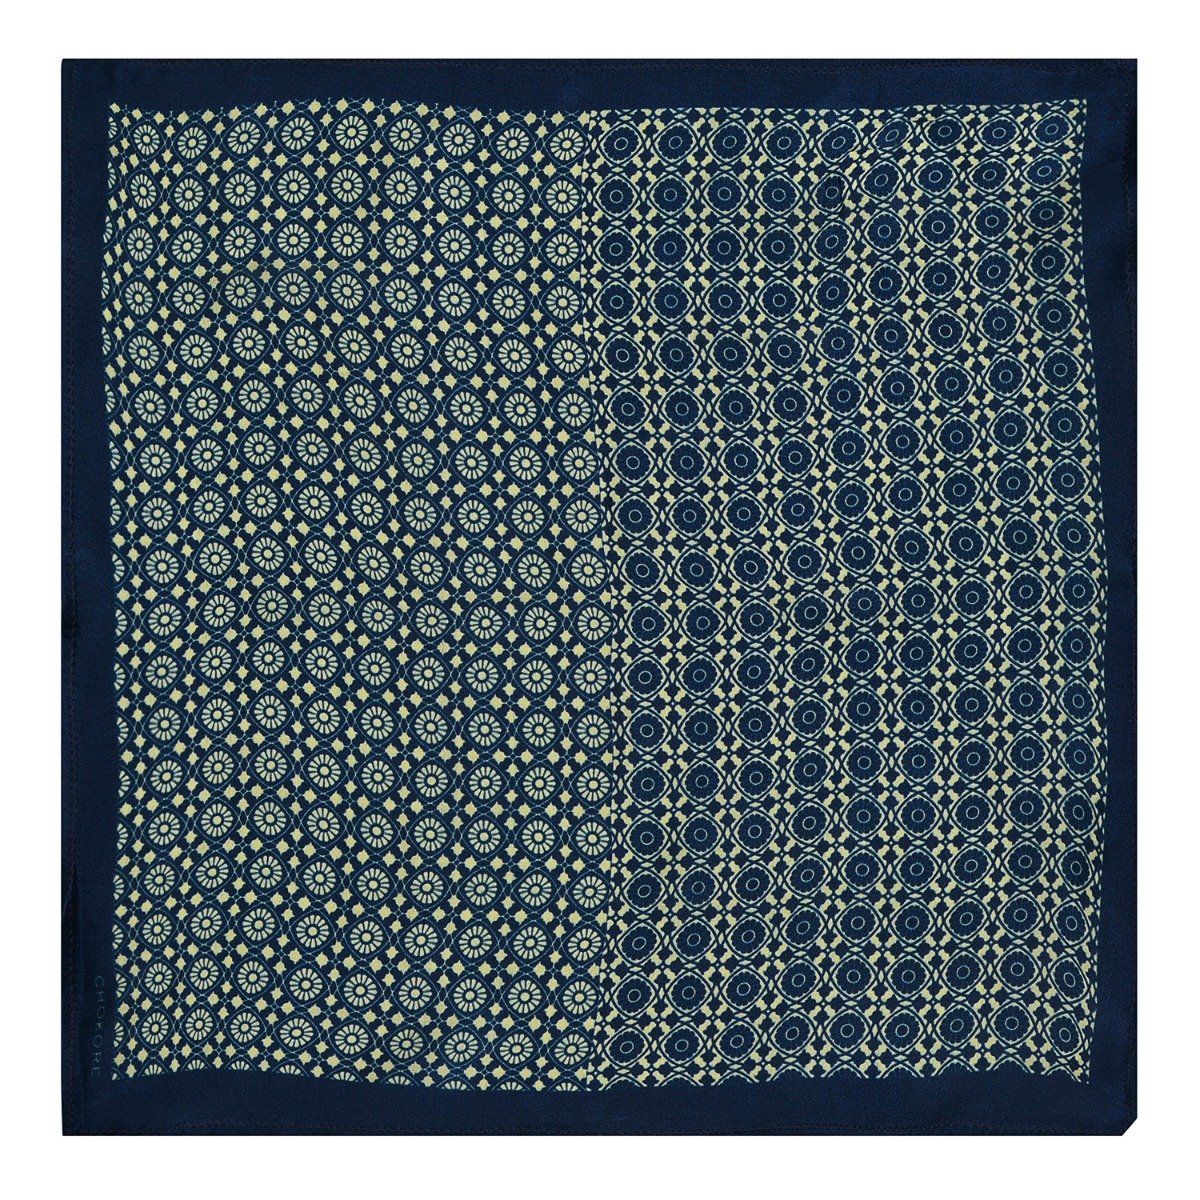 Chokore Blue and White Silk Pocket Square -Indian At Heart line